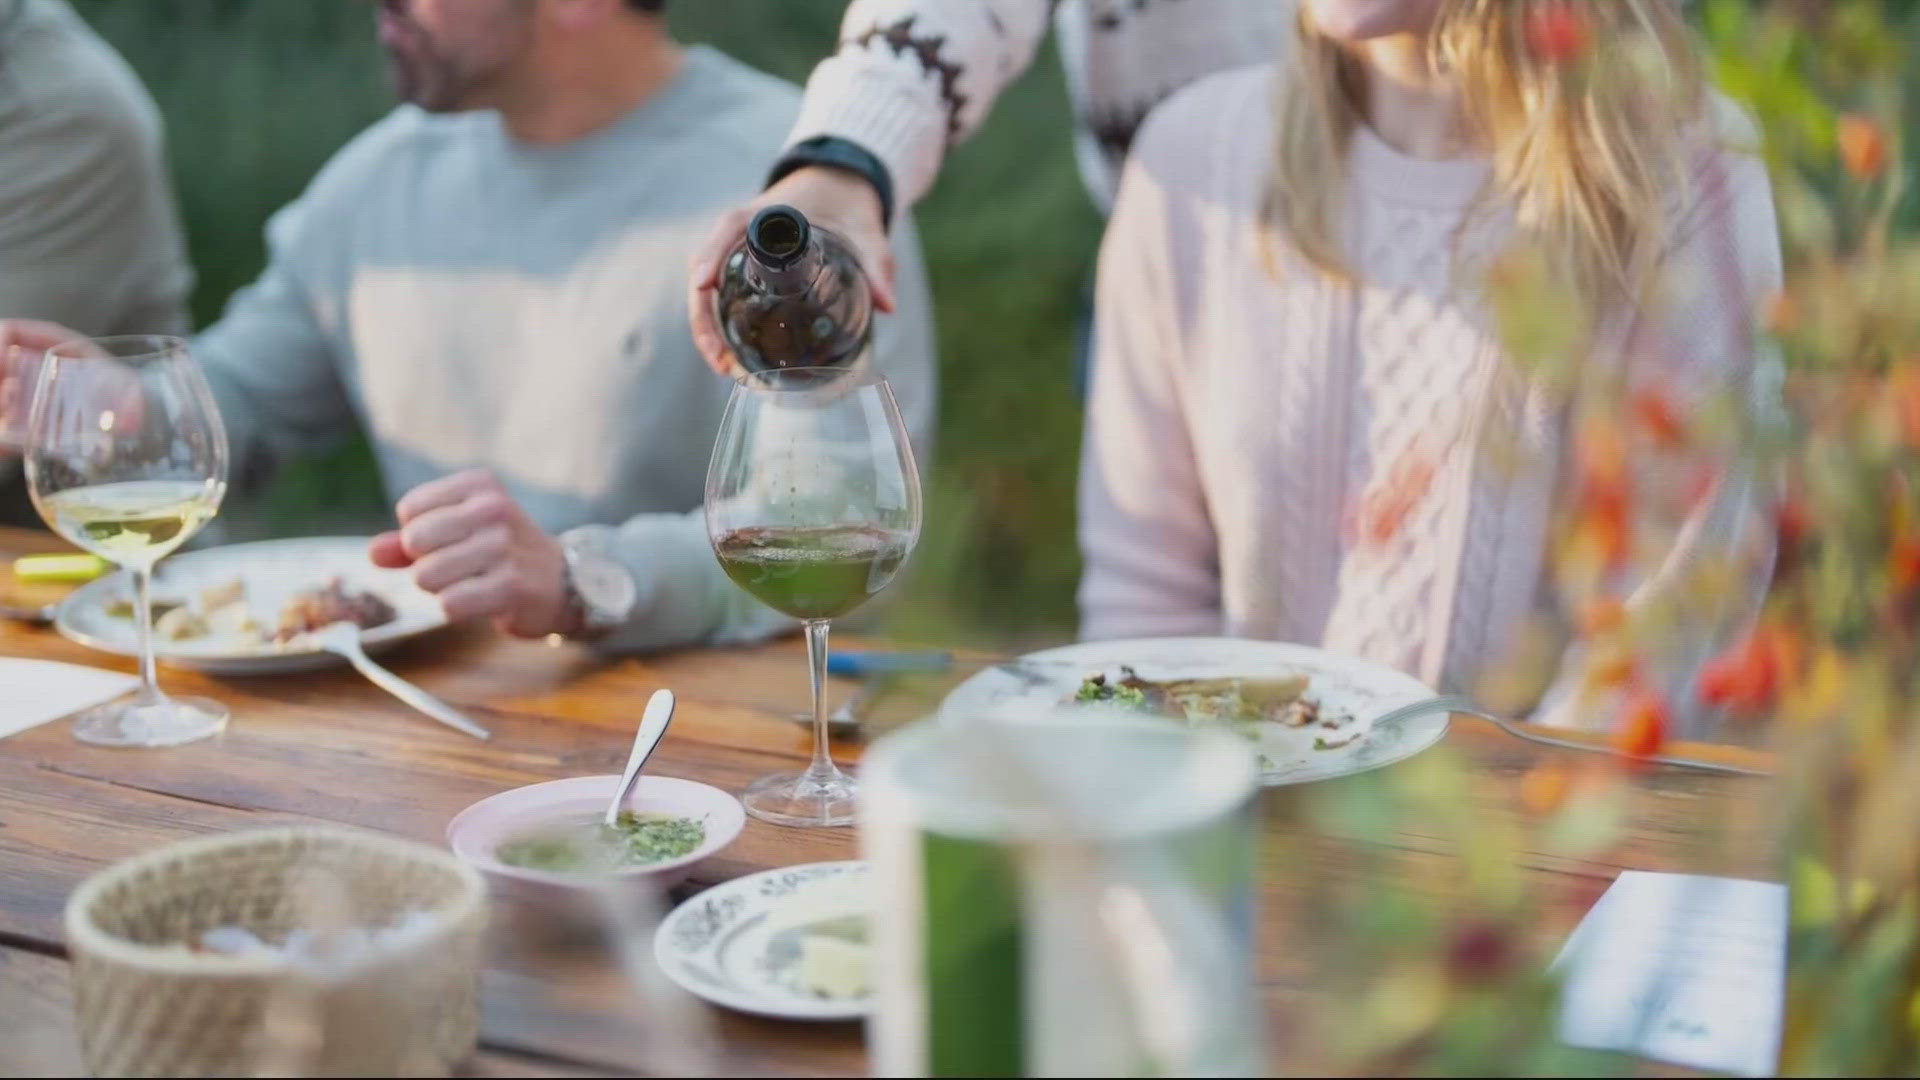 The first ever Tualatin Valley Spring Sips event runs through May 19. More than 15 local restaurants are offering wine tasting flights for $20.